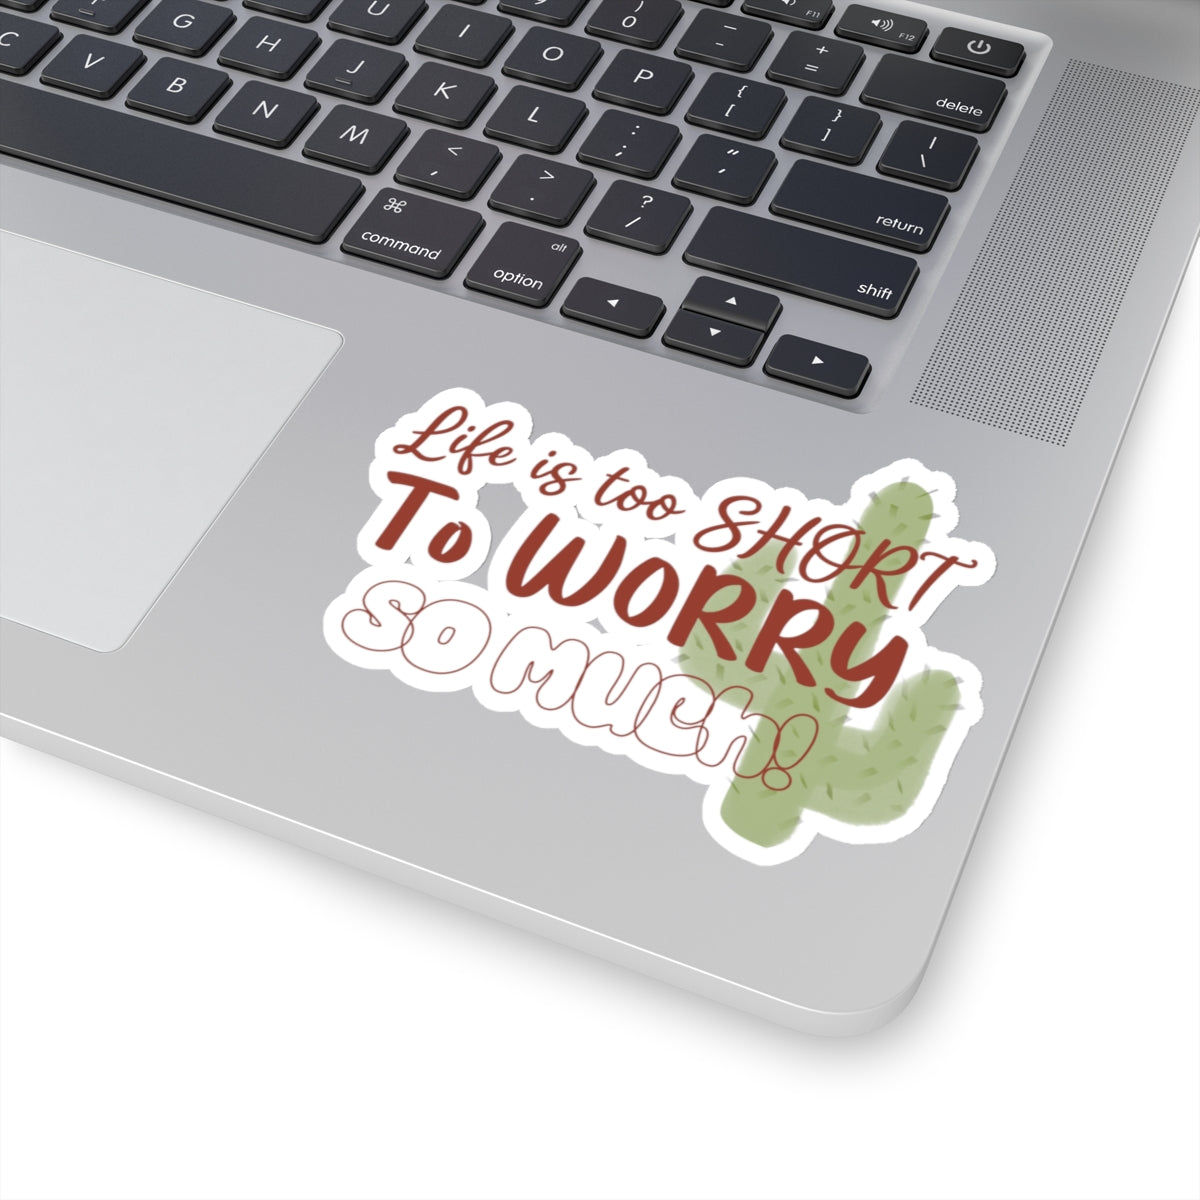 Life is too SHORT to WORRY so MUCH! | Kiss-Cut Stickers